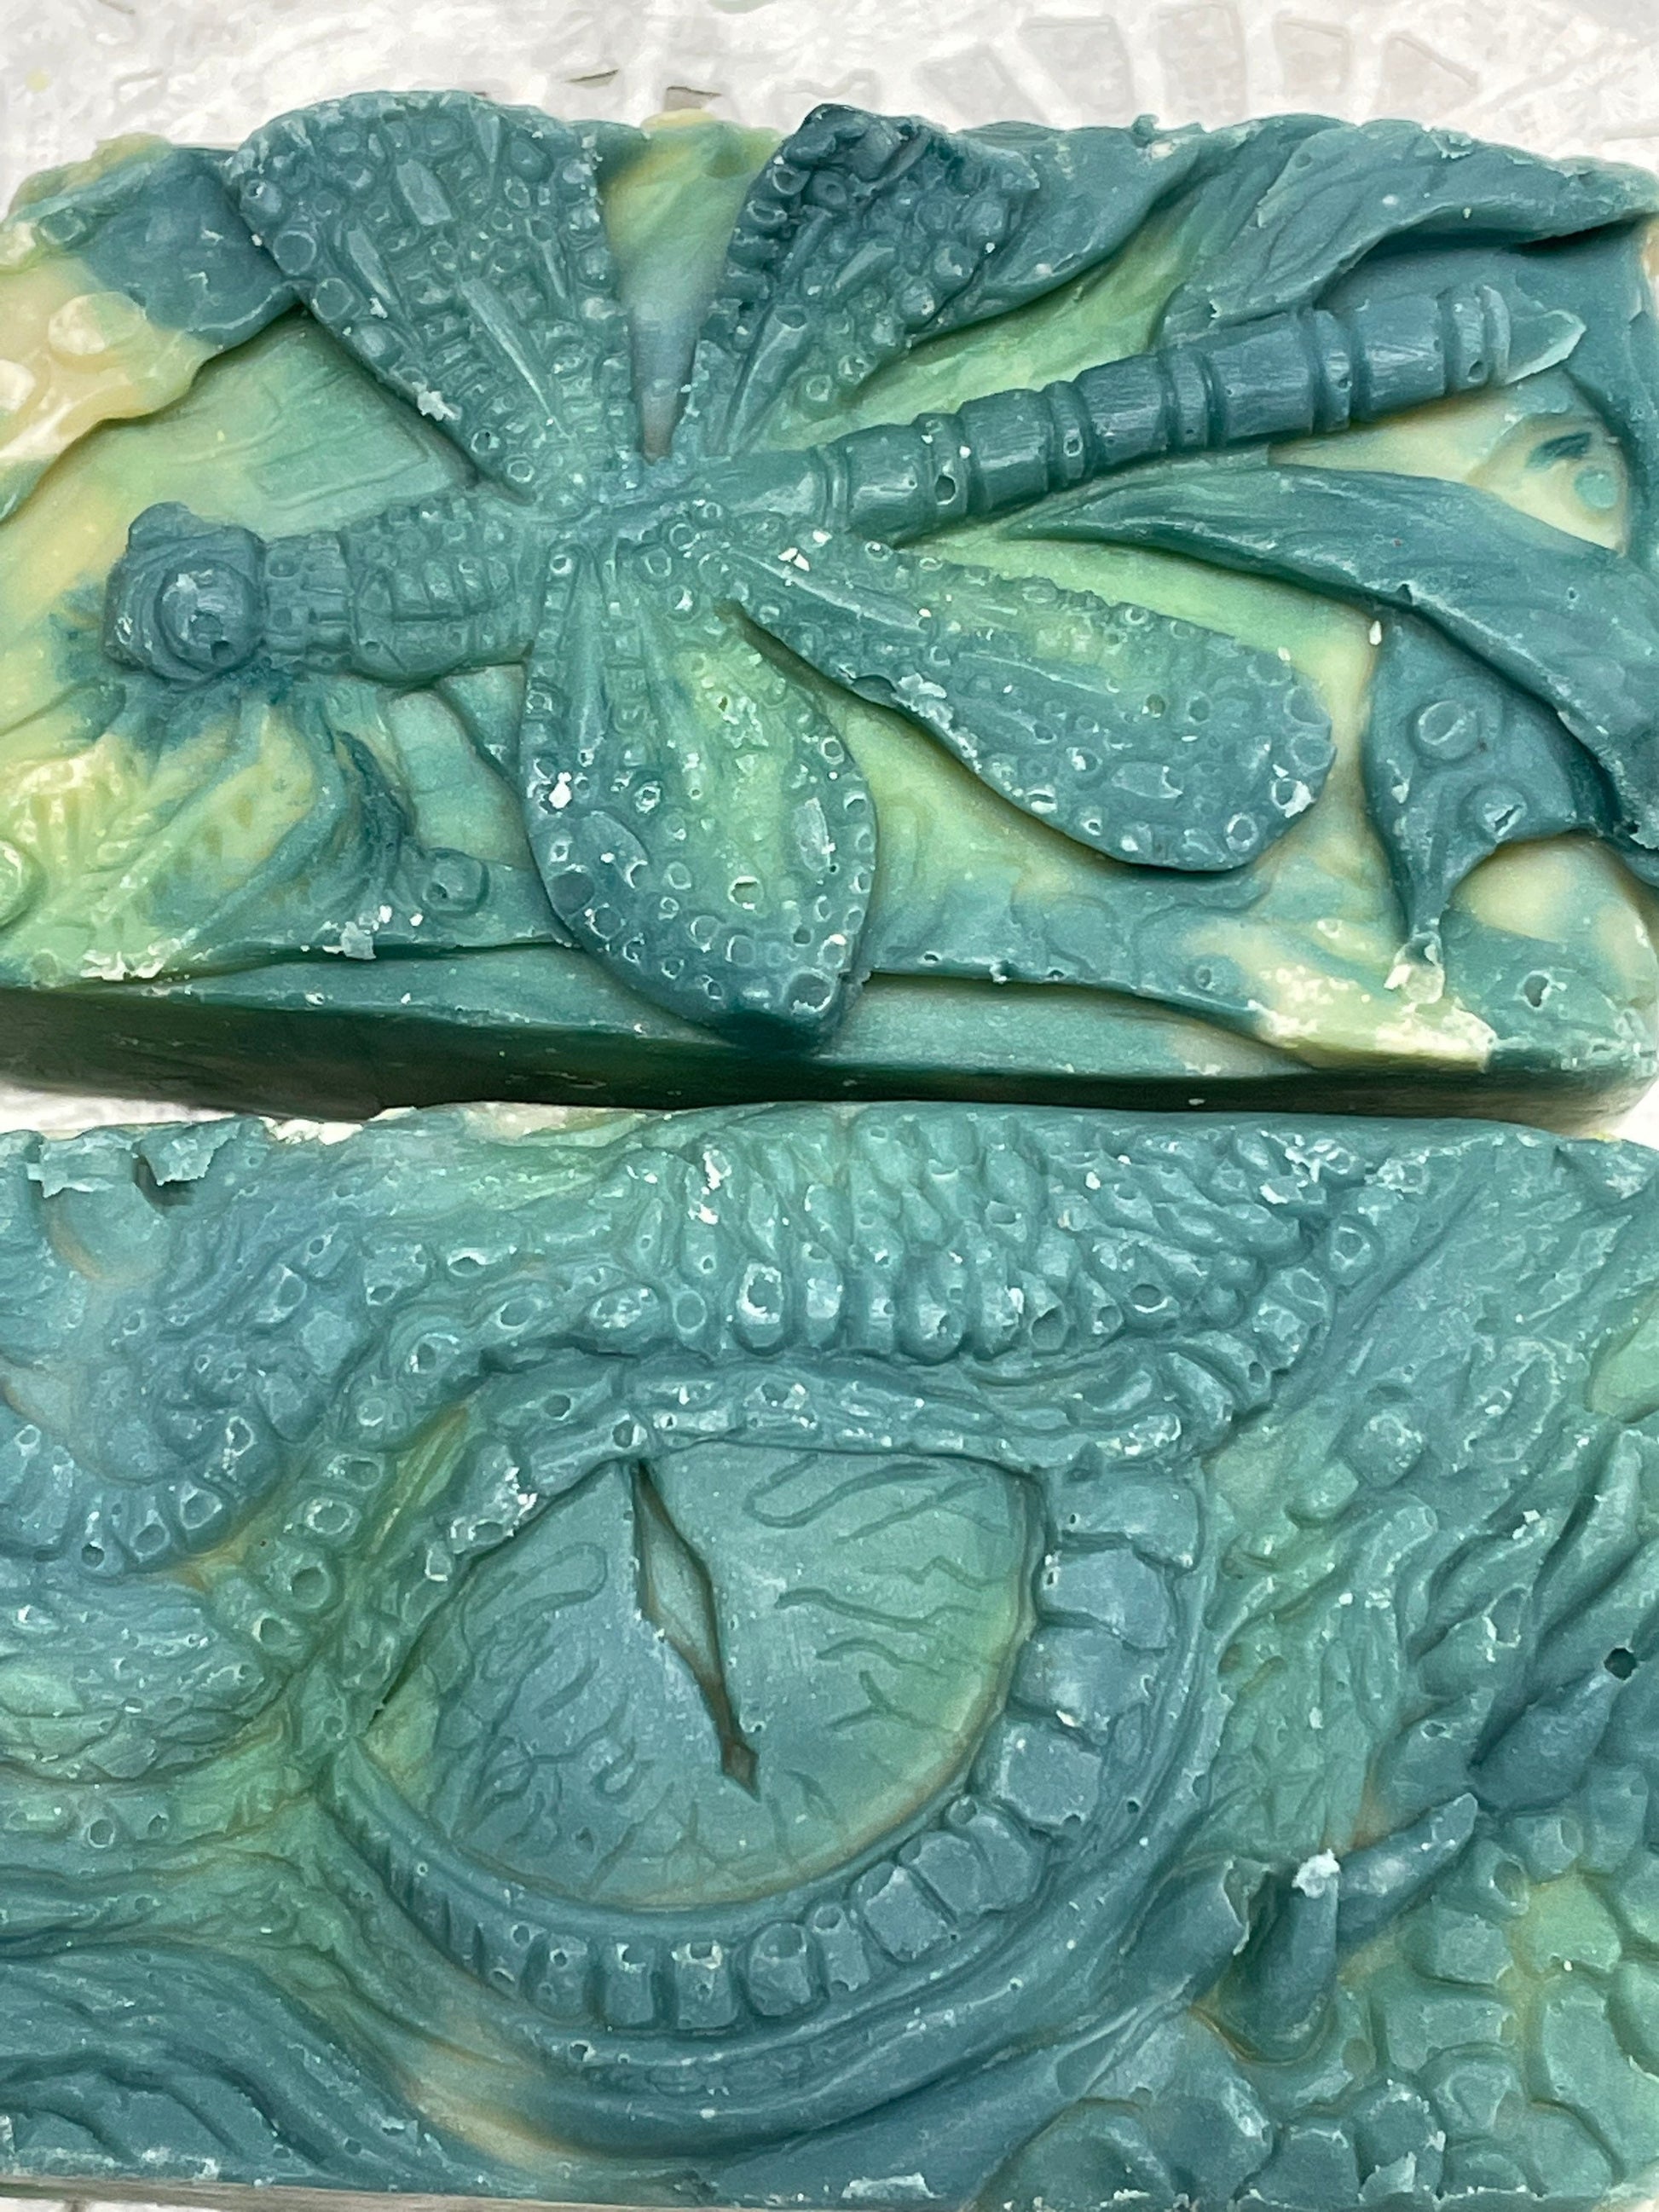 A photo of Dragon Eye and Dragonfly Aloe Vera and Cucumber Soap side by side